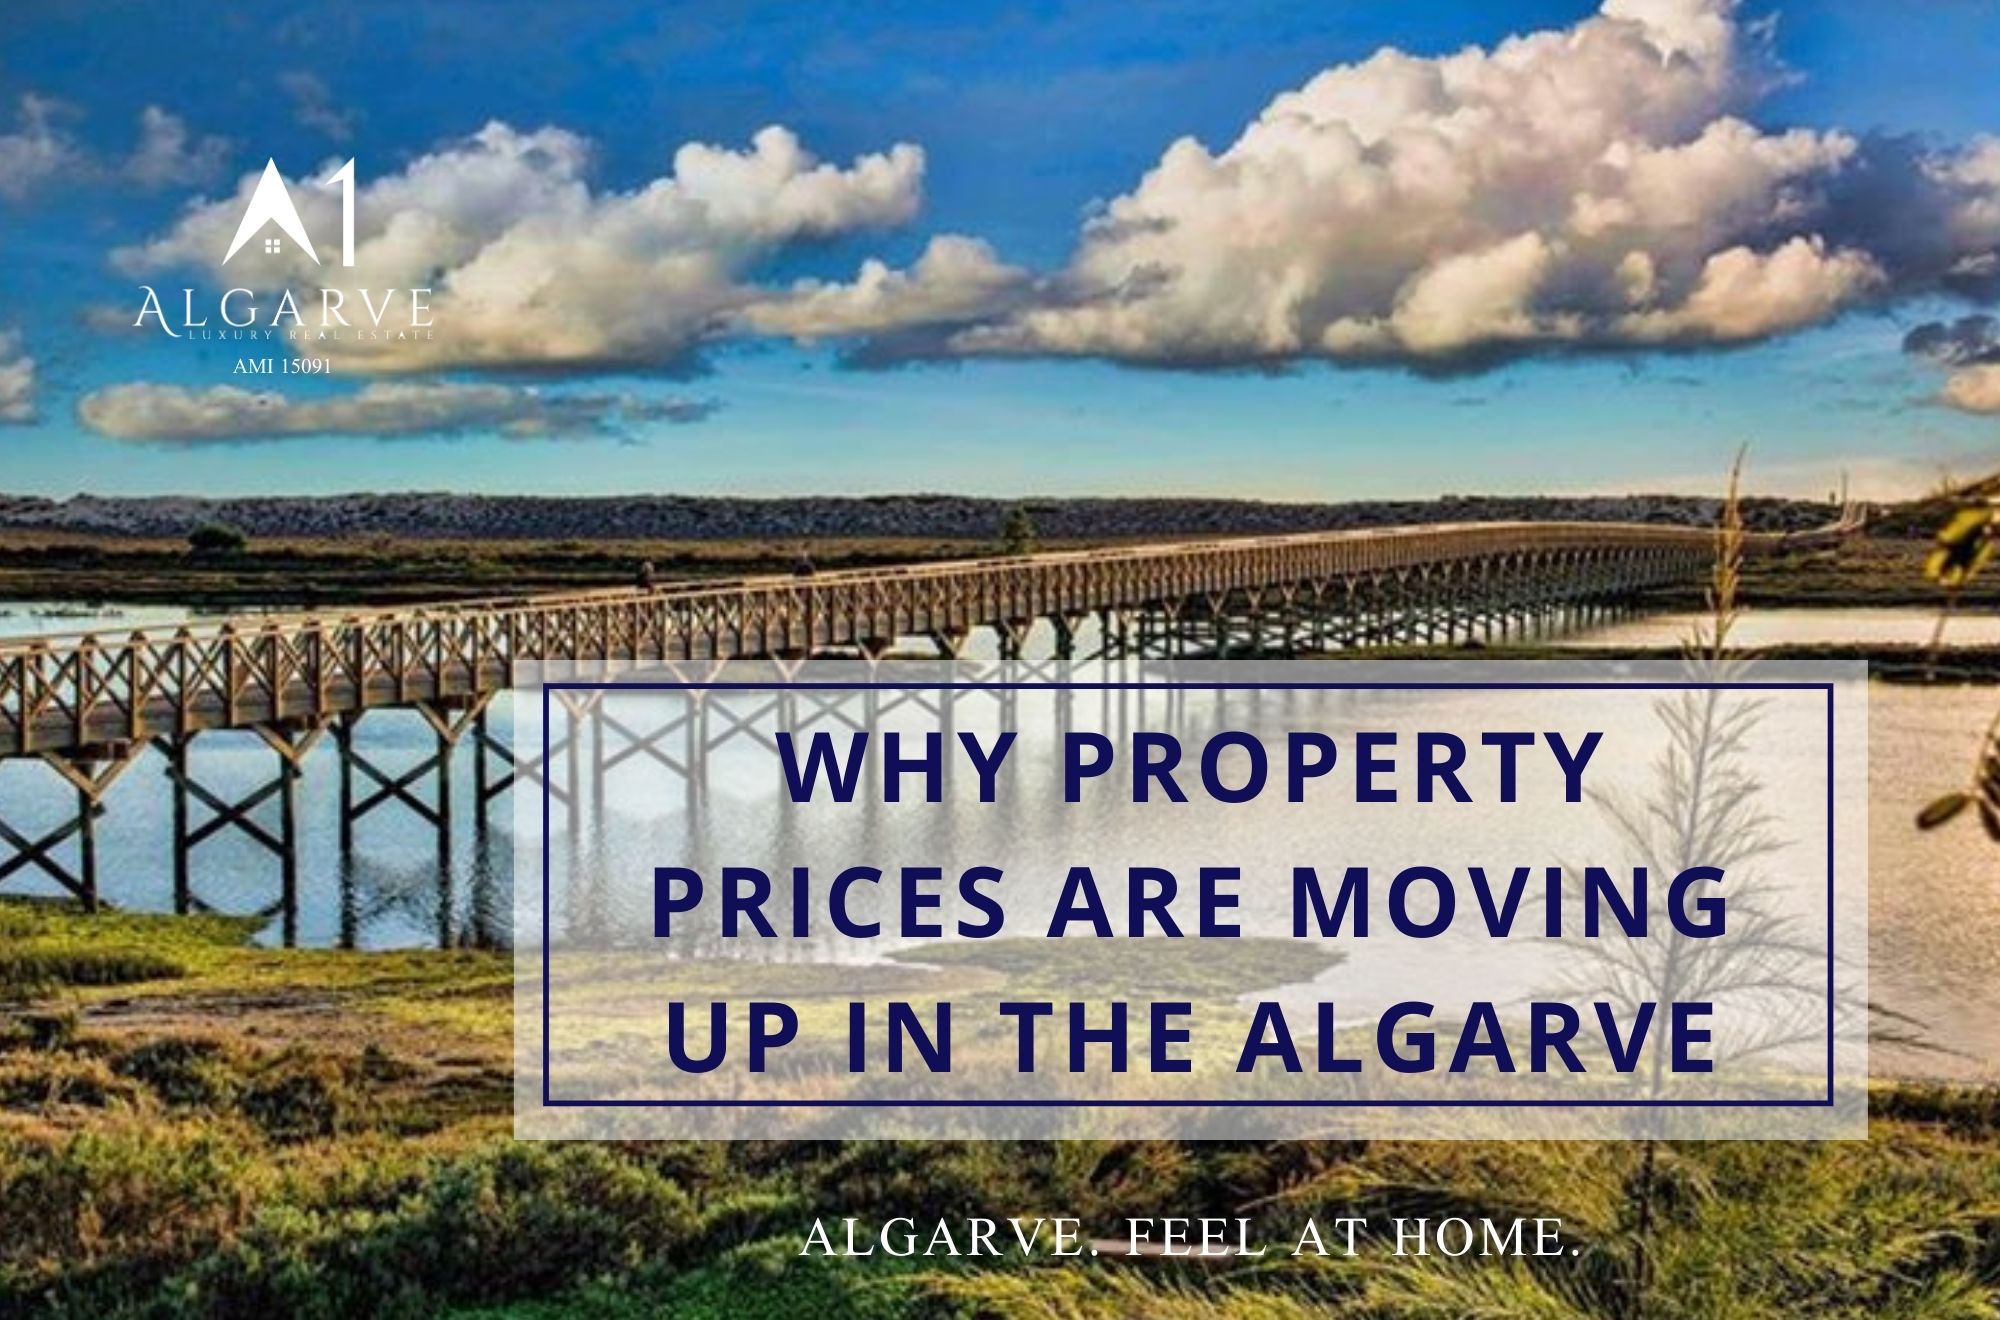 Why Property Prices Are Moving Up In The Algarve